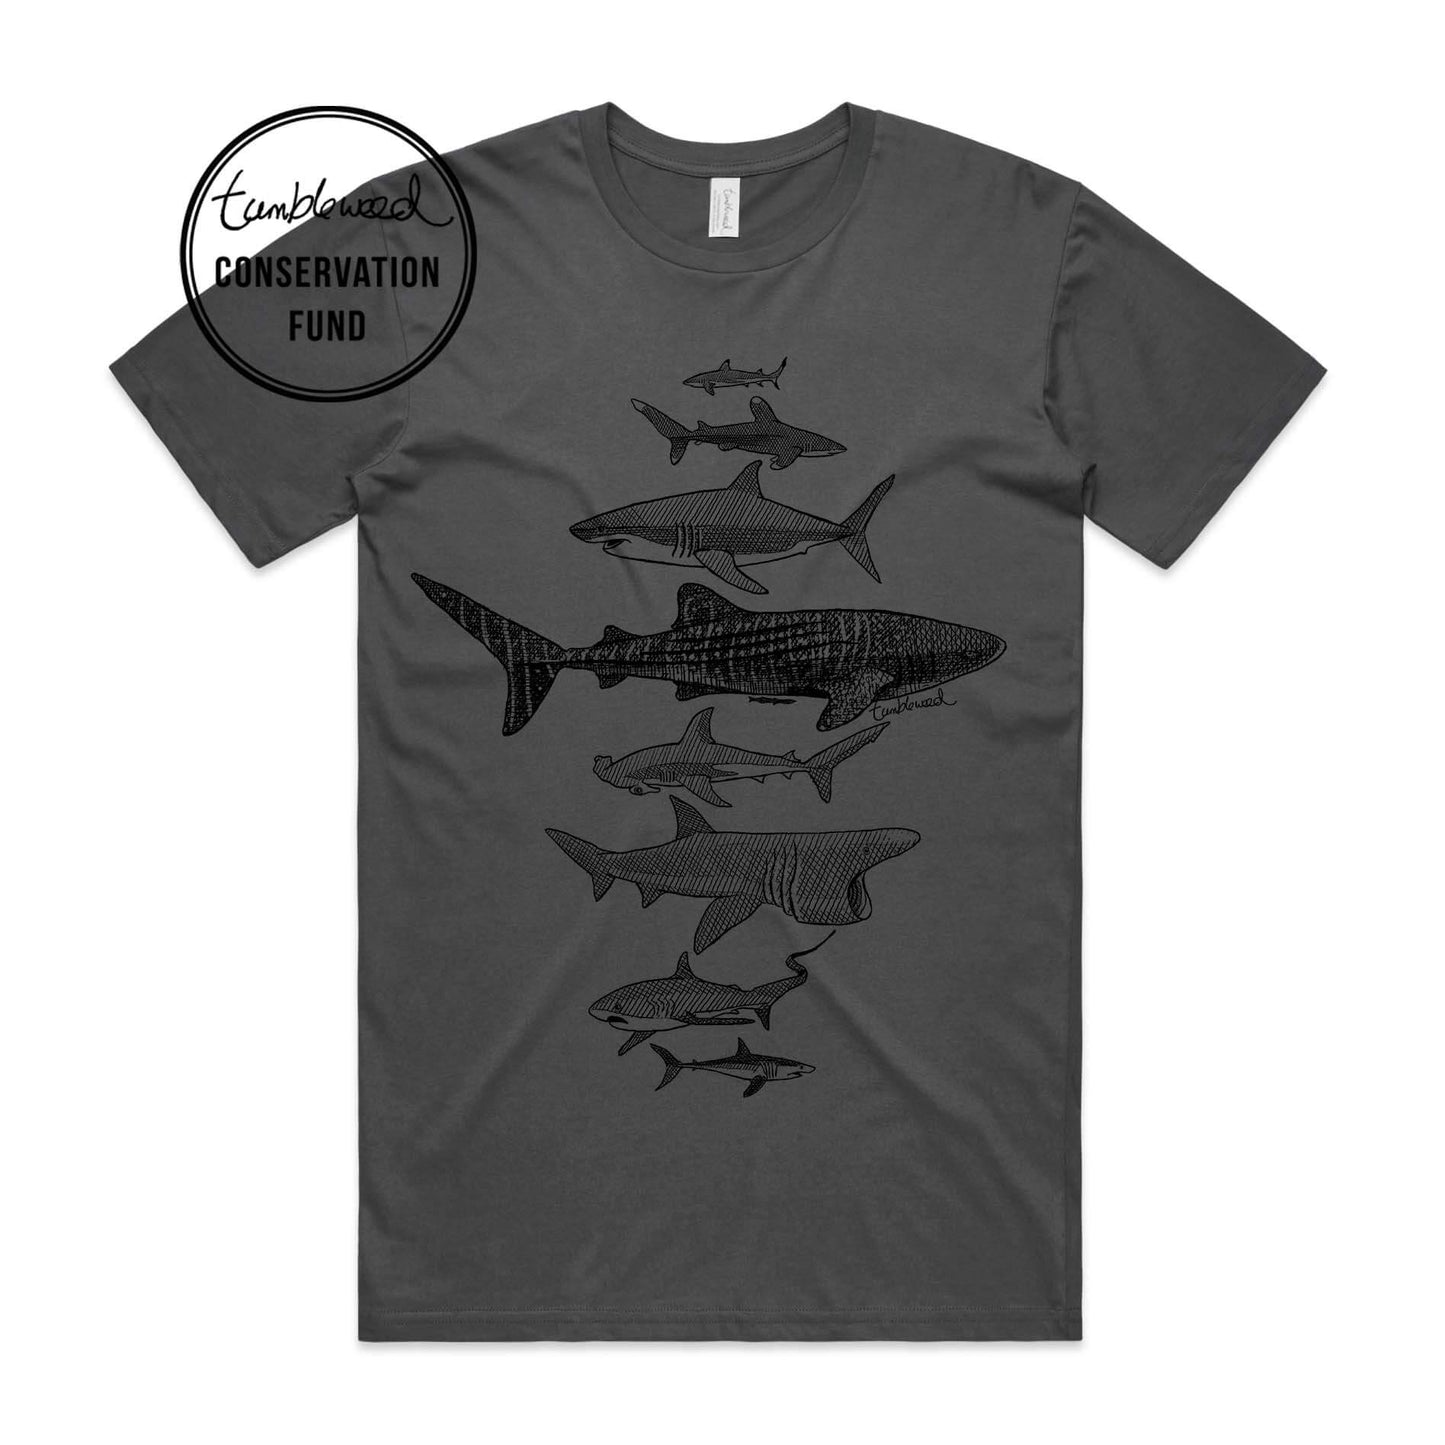 Charcoal, female t-shirt featuring a screen printed Sharks design.